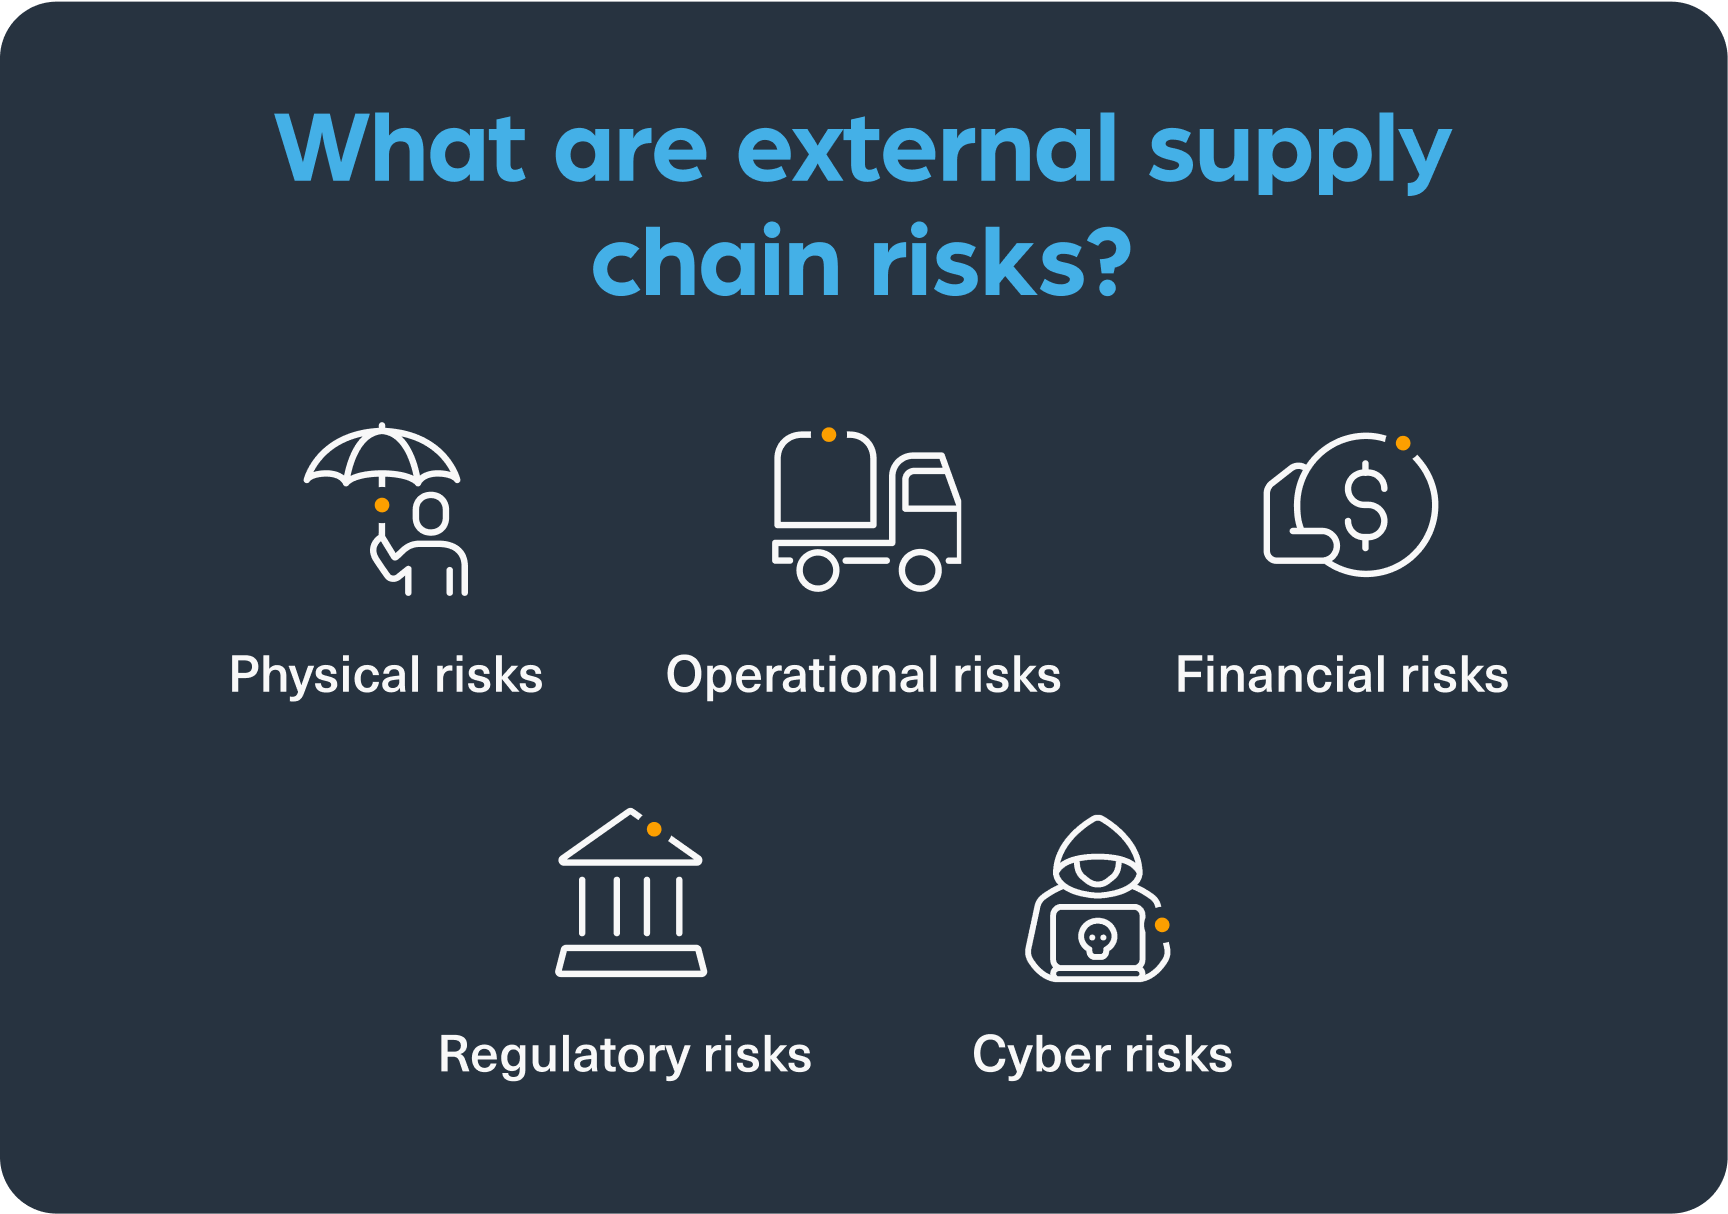 External supply chain risks include physical risks, operational risks, financial risks, regulatory risks and cyber risks.